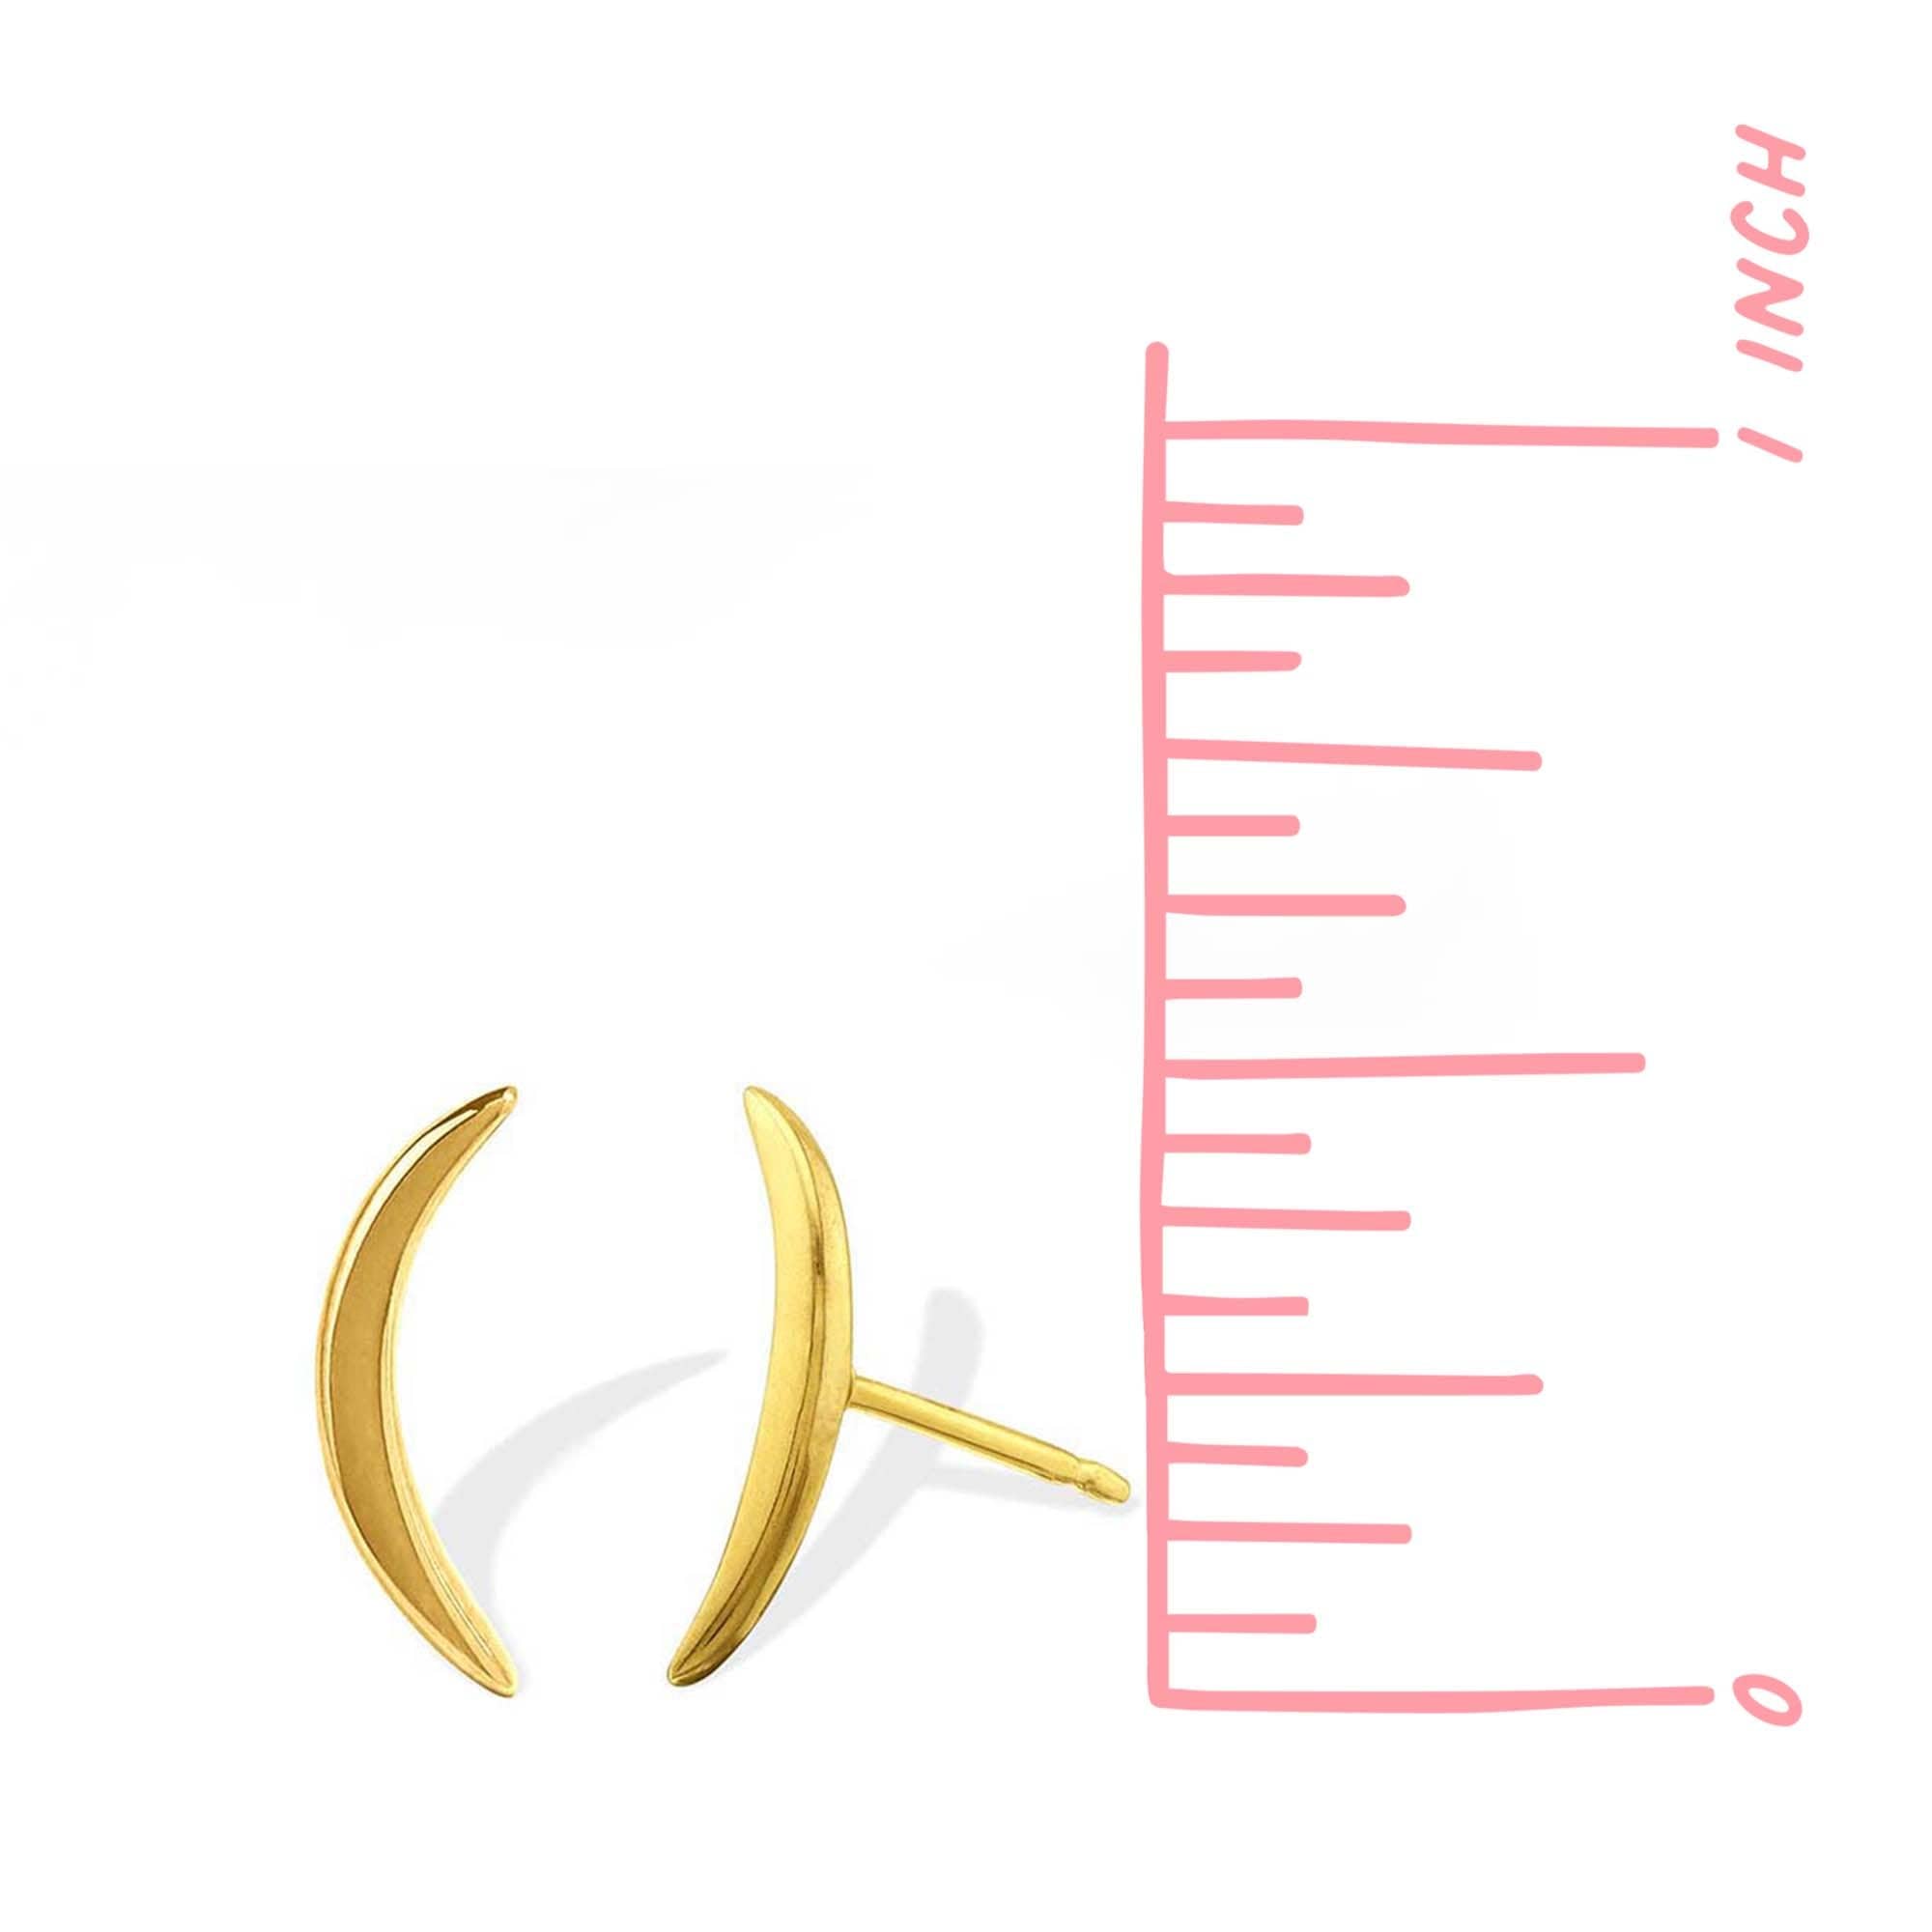 Boma Jewelry Earrings Waxing Crescent Moon Studs Gold